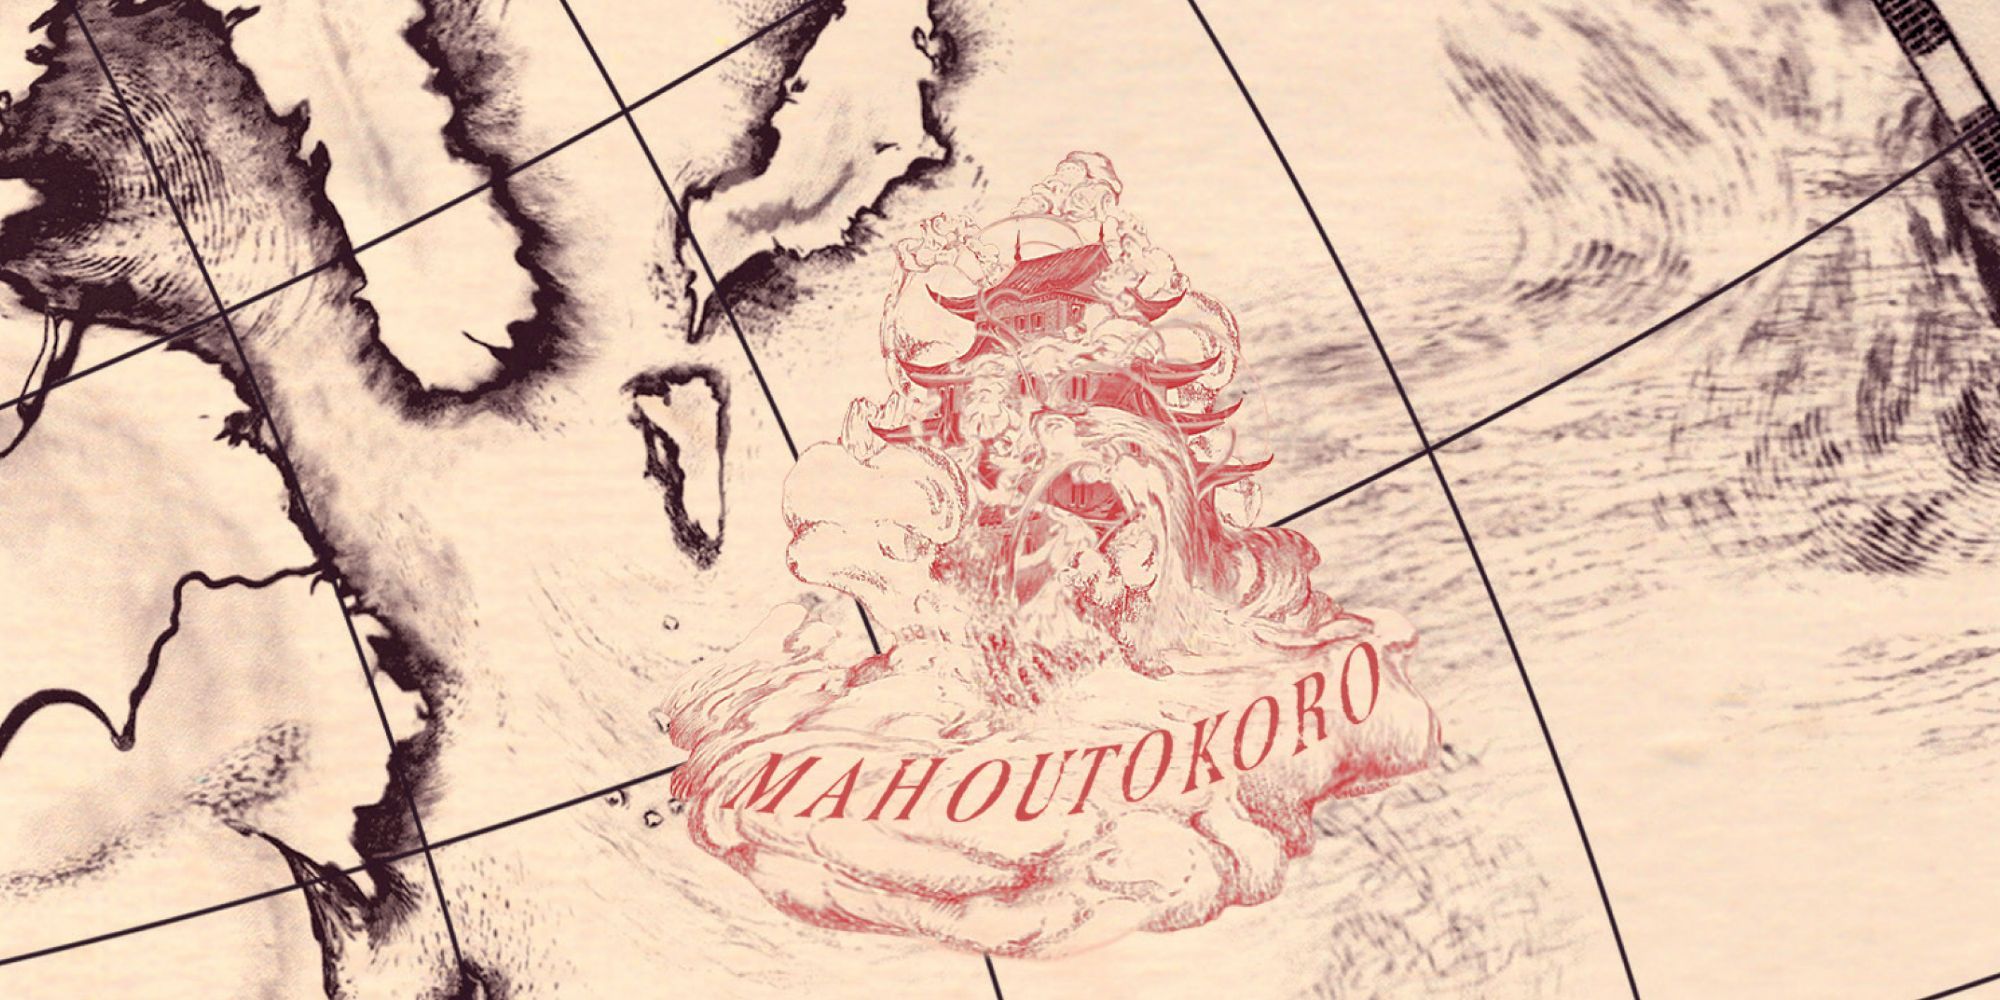 Mahoutokoro wizarding school marked on a map on the Wizarding World website